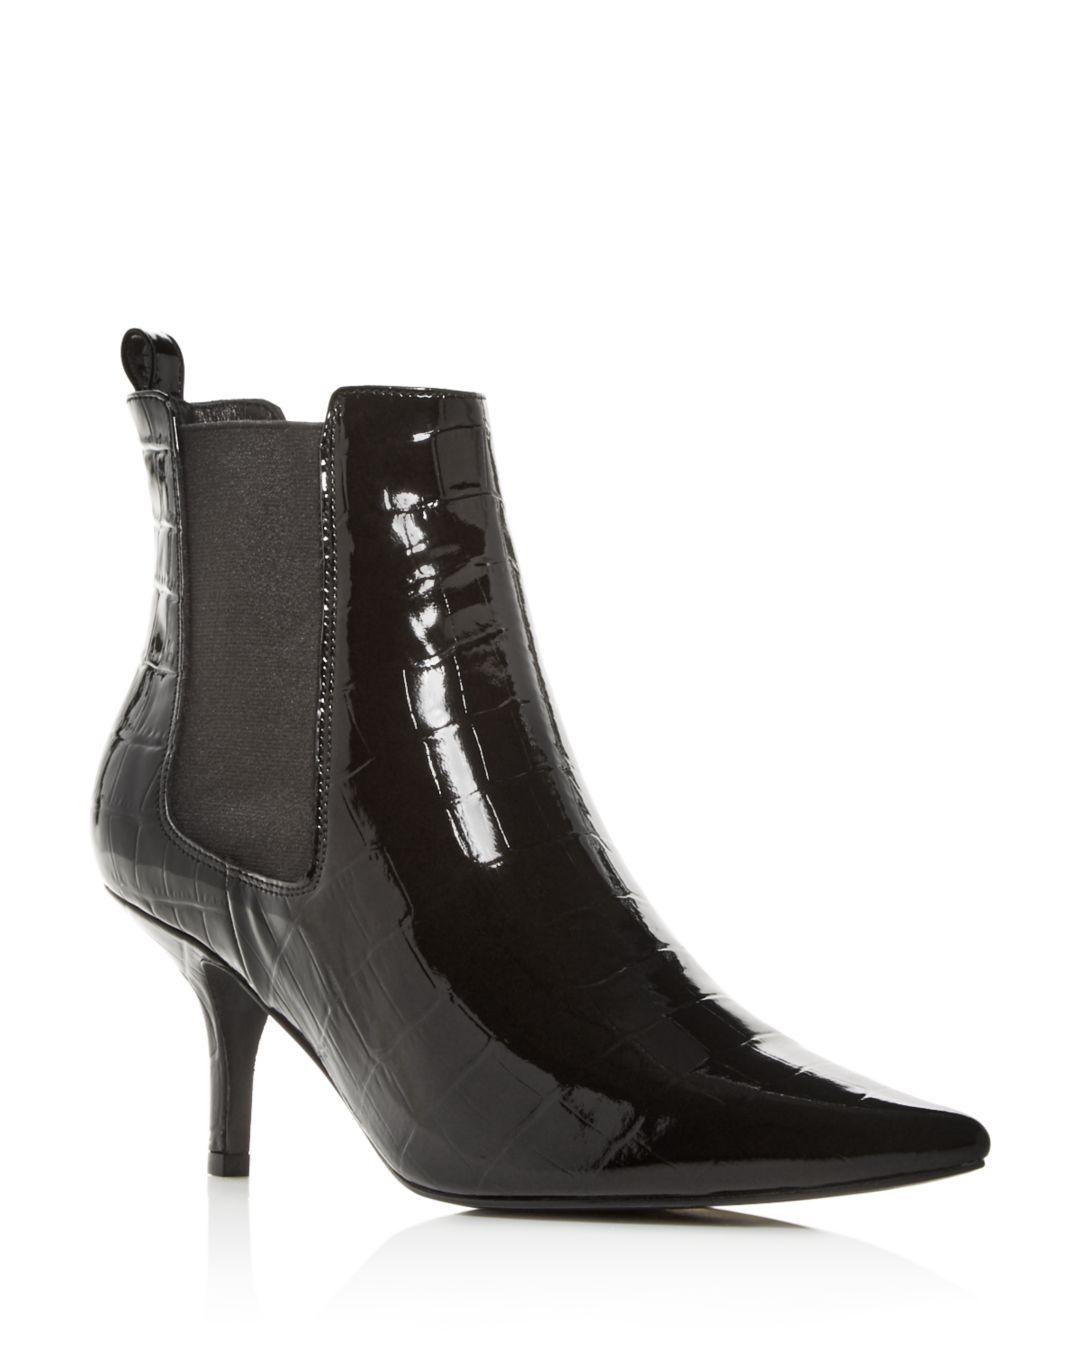 Anine Bing Patent Leather Boots in Black - Lyst